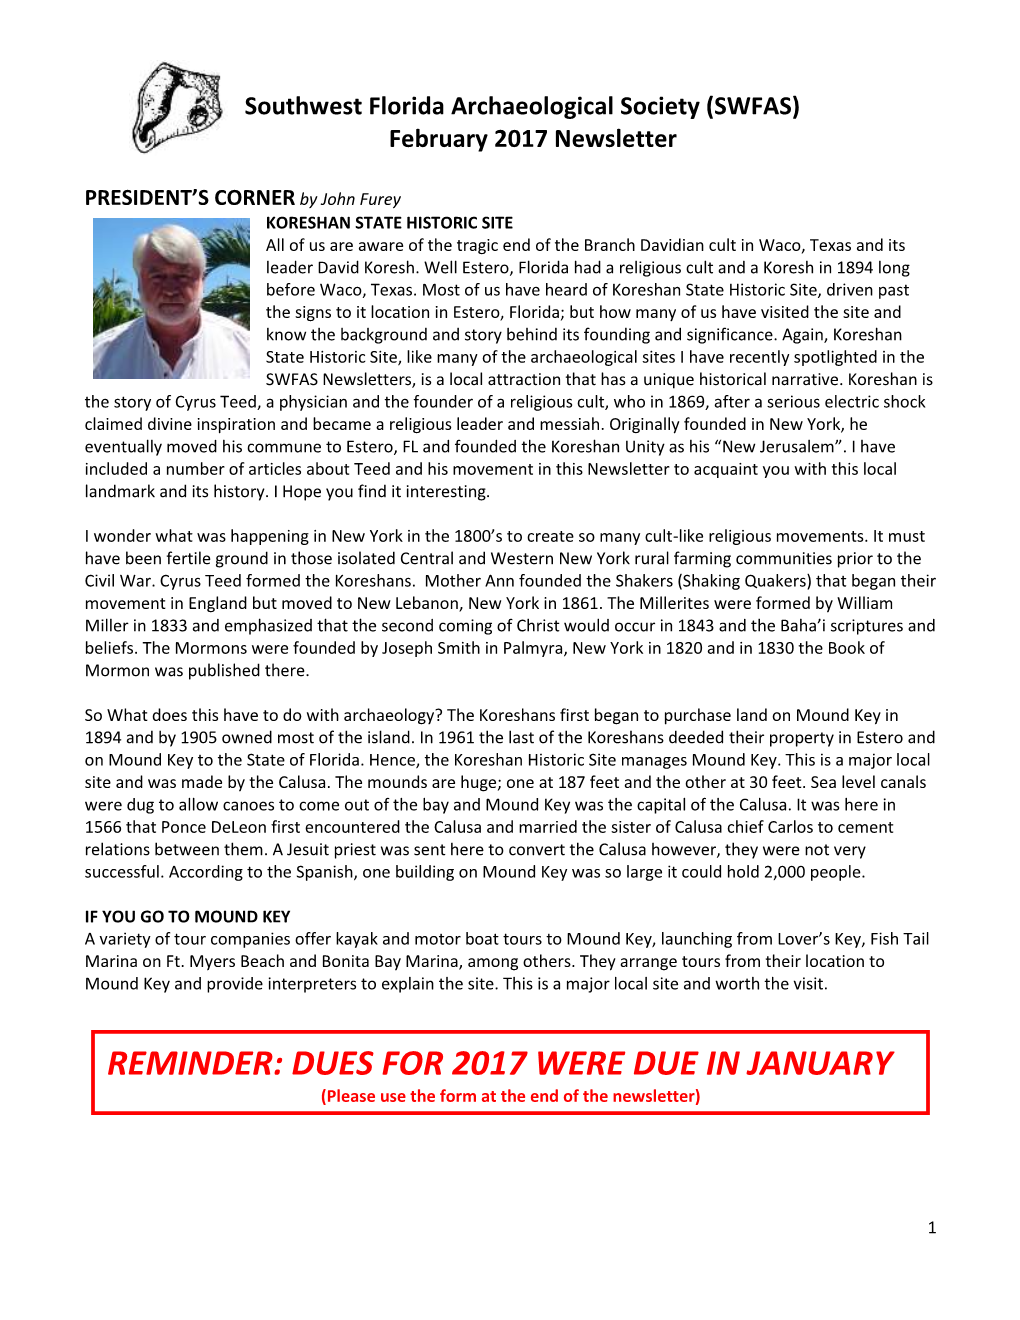 DUES for 2017 WERE DUE in JANUARY (Please Use the Form at the End of the Newsletter)